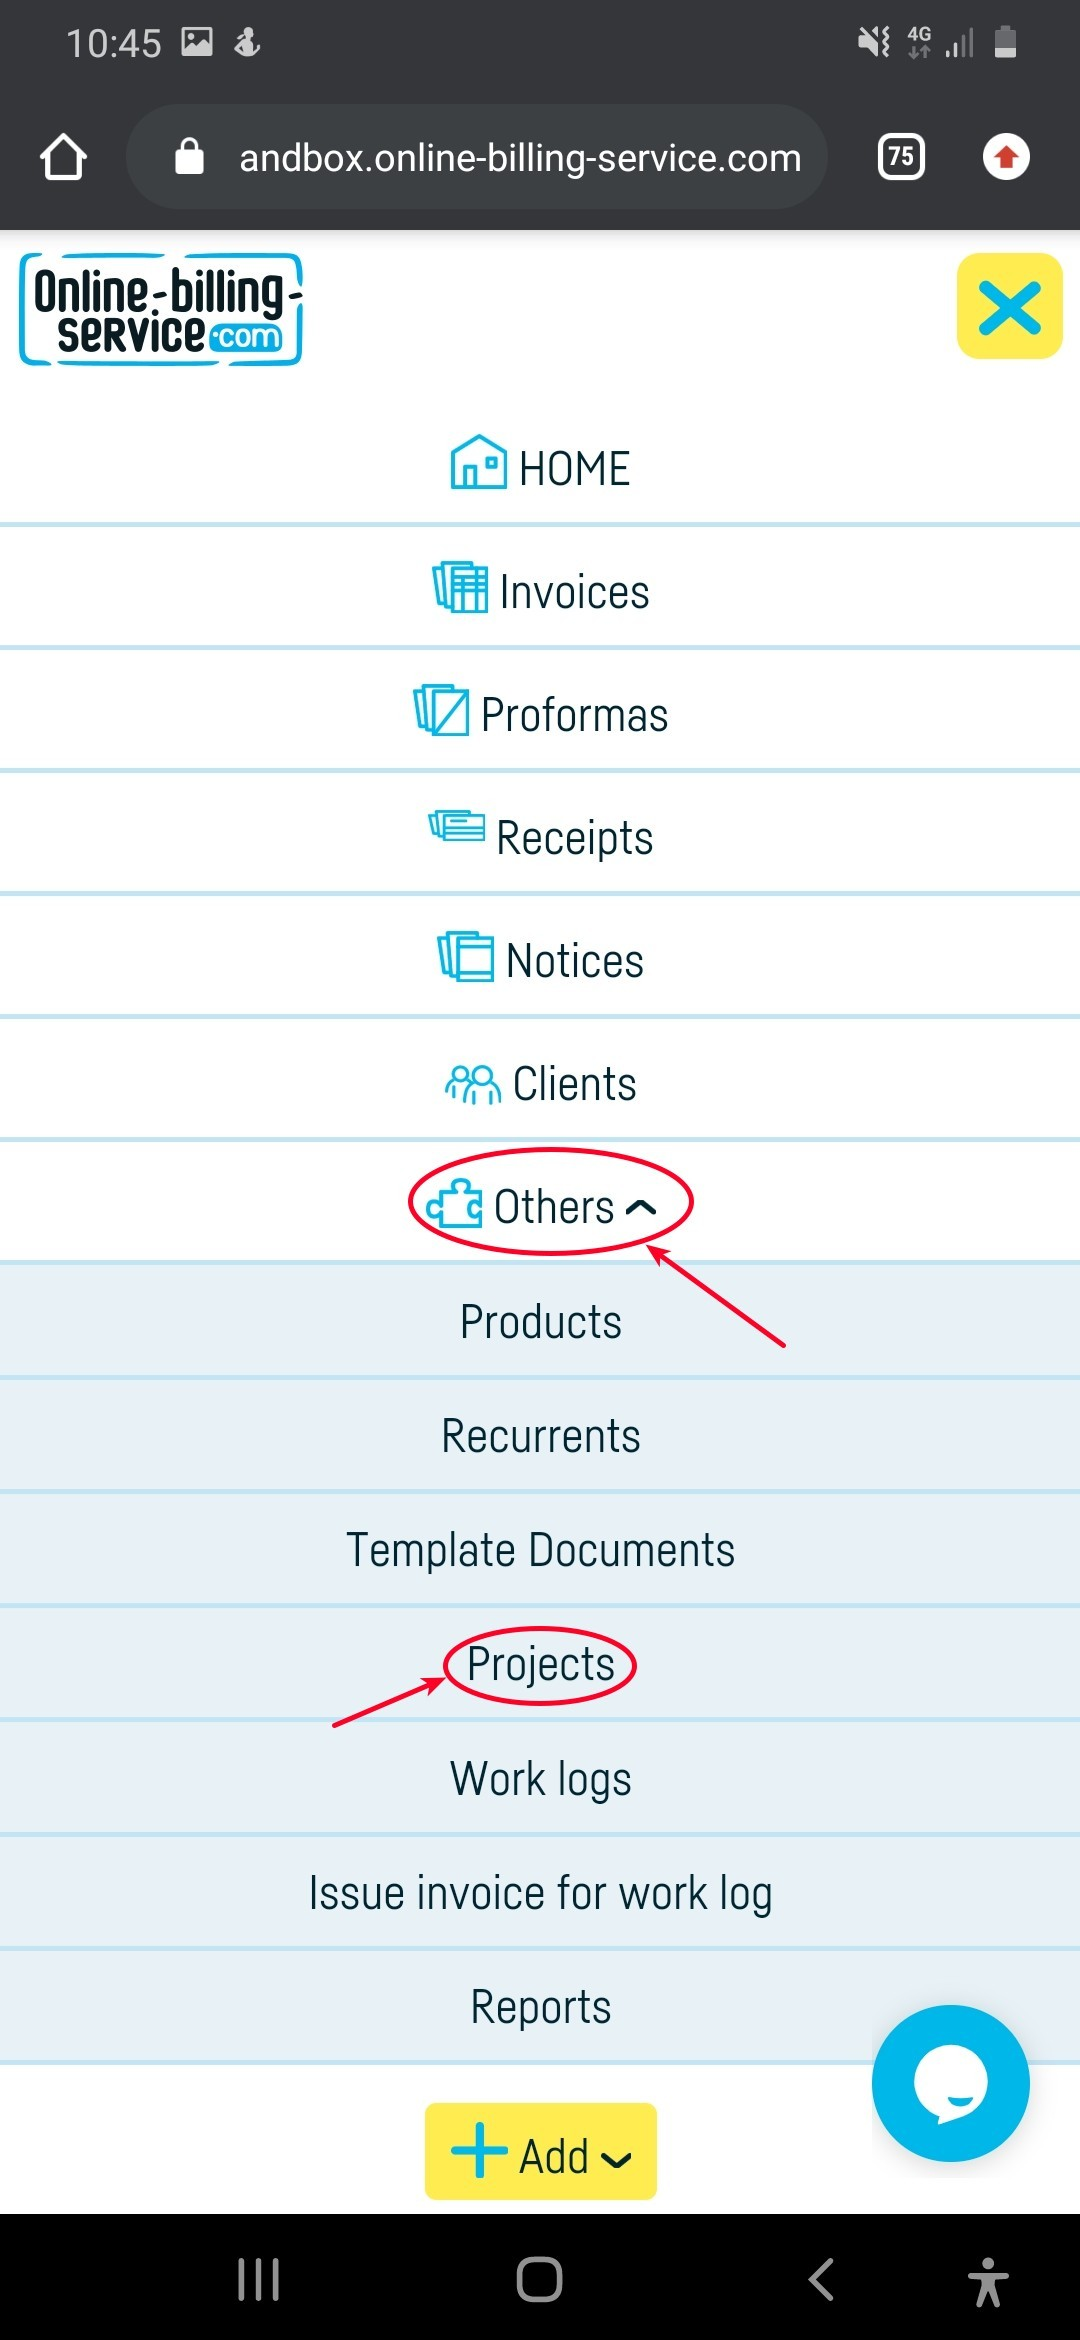 Who can add work logs? - step 4